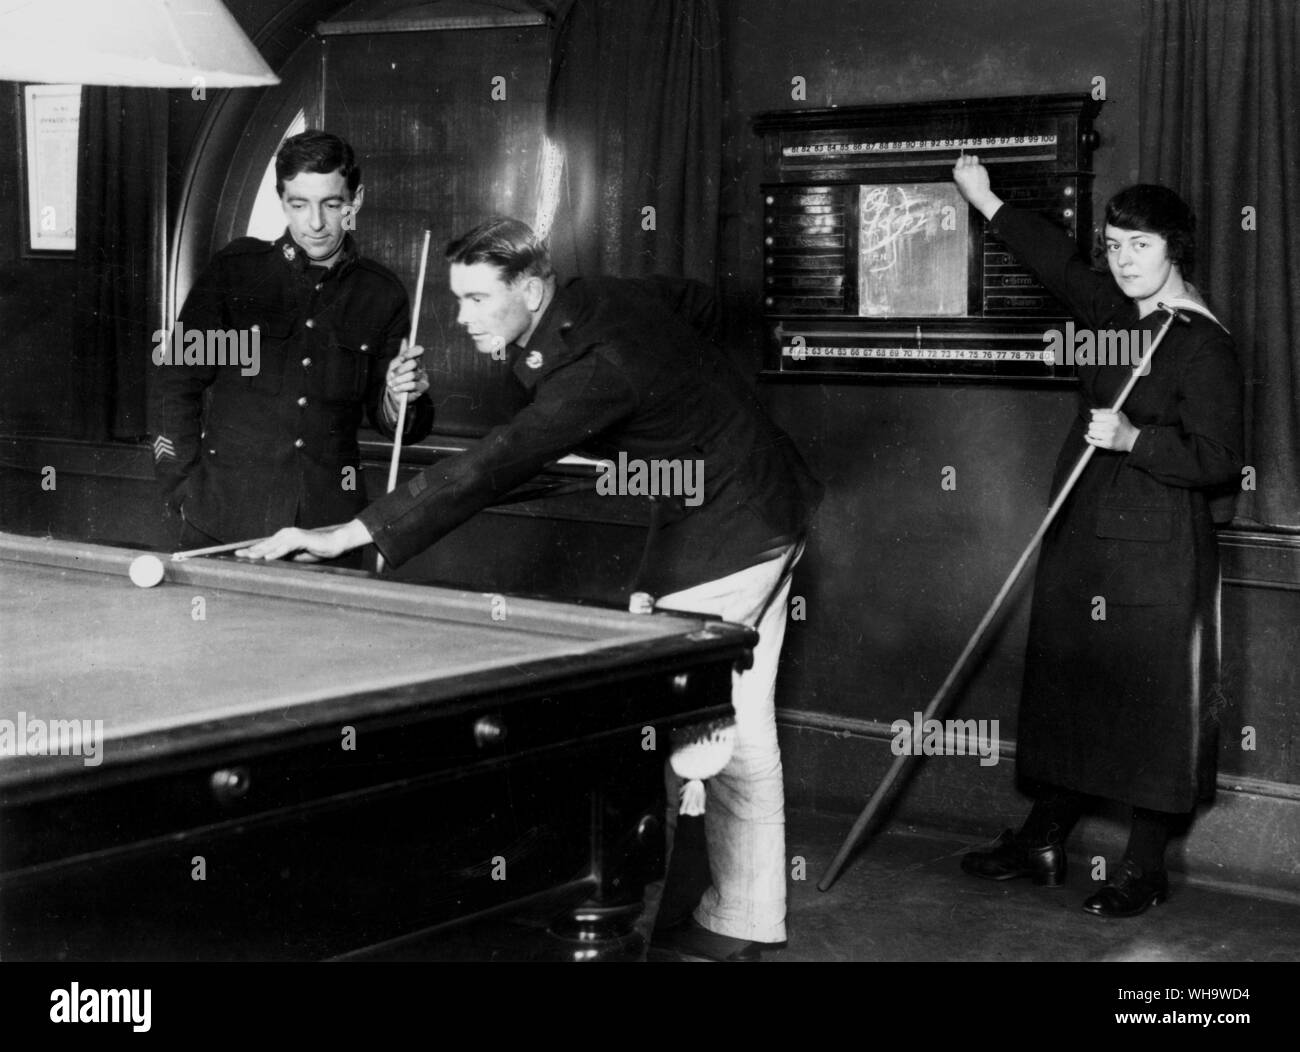 WW1: A rating of the WRNS acting as billiard marker in the men's recreation room, Royal Marine barracks, Chatham, Kent. Stock Photo